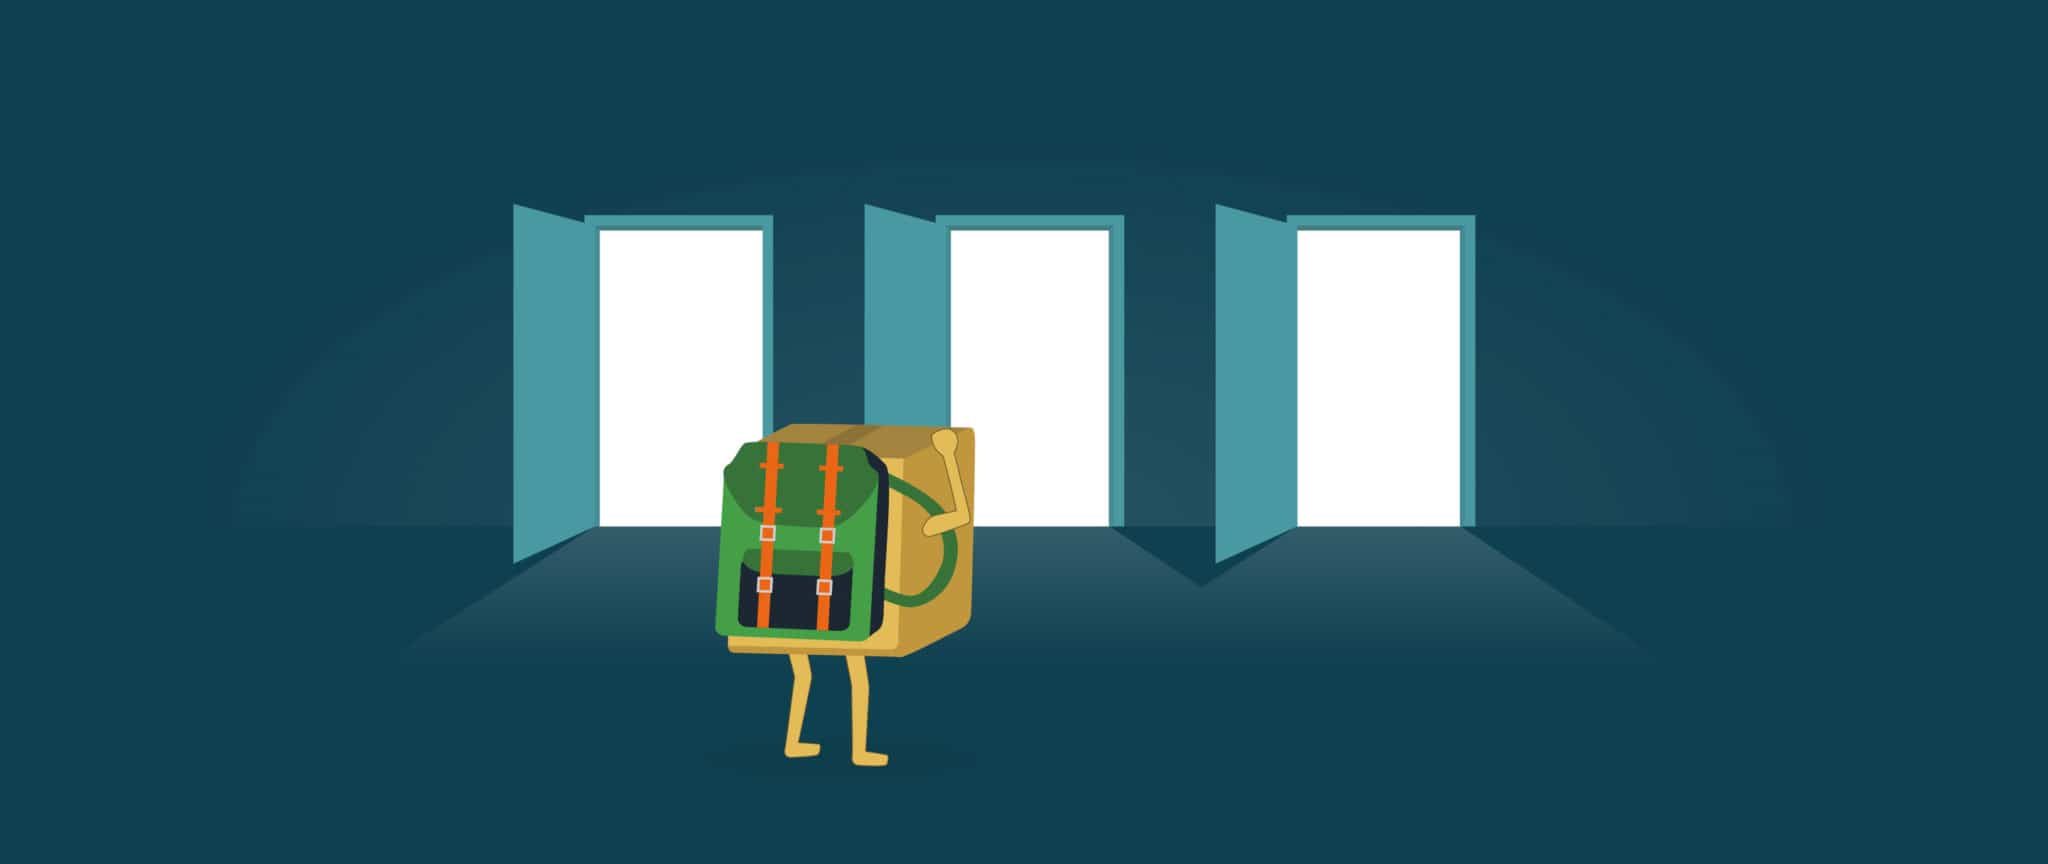 A backpacking box comes face to face with three different glowing doors.